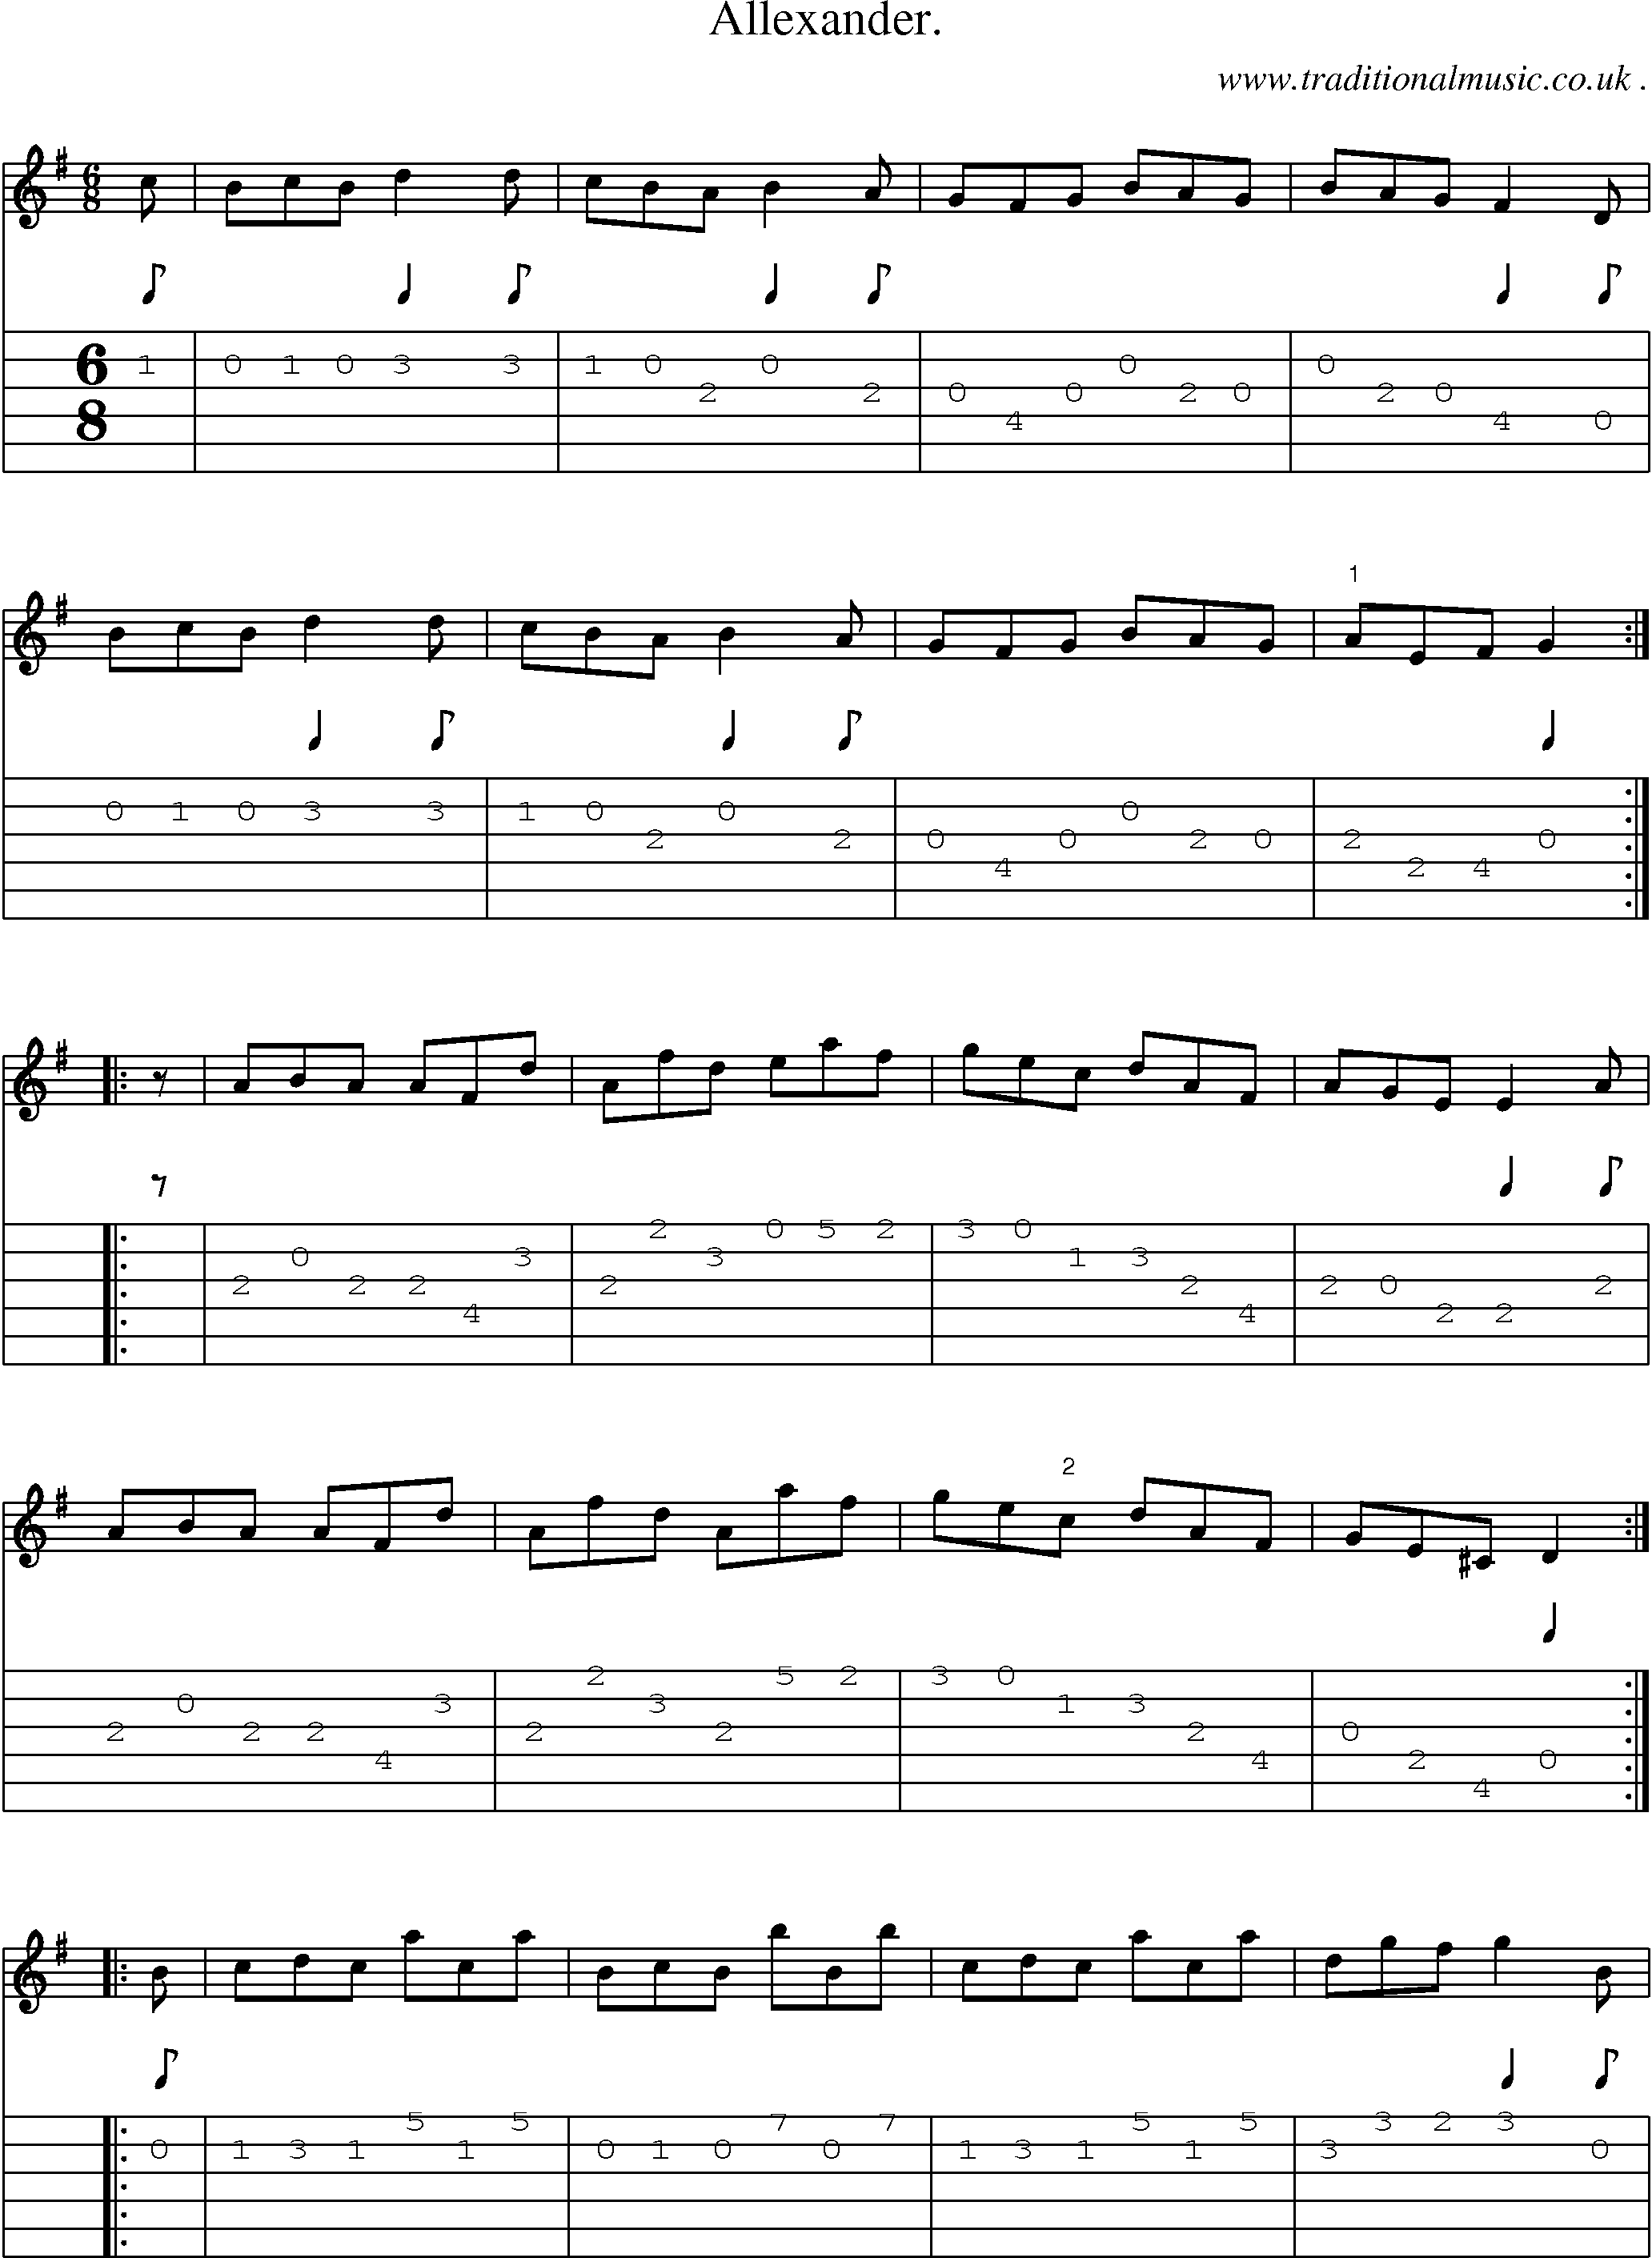 Sheet-Music and Guitar Tabs for Allexander